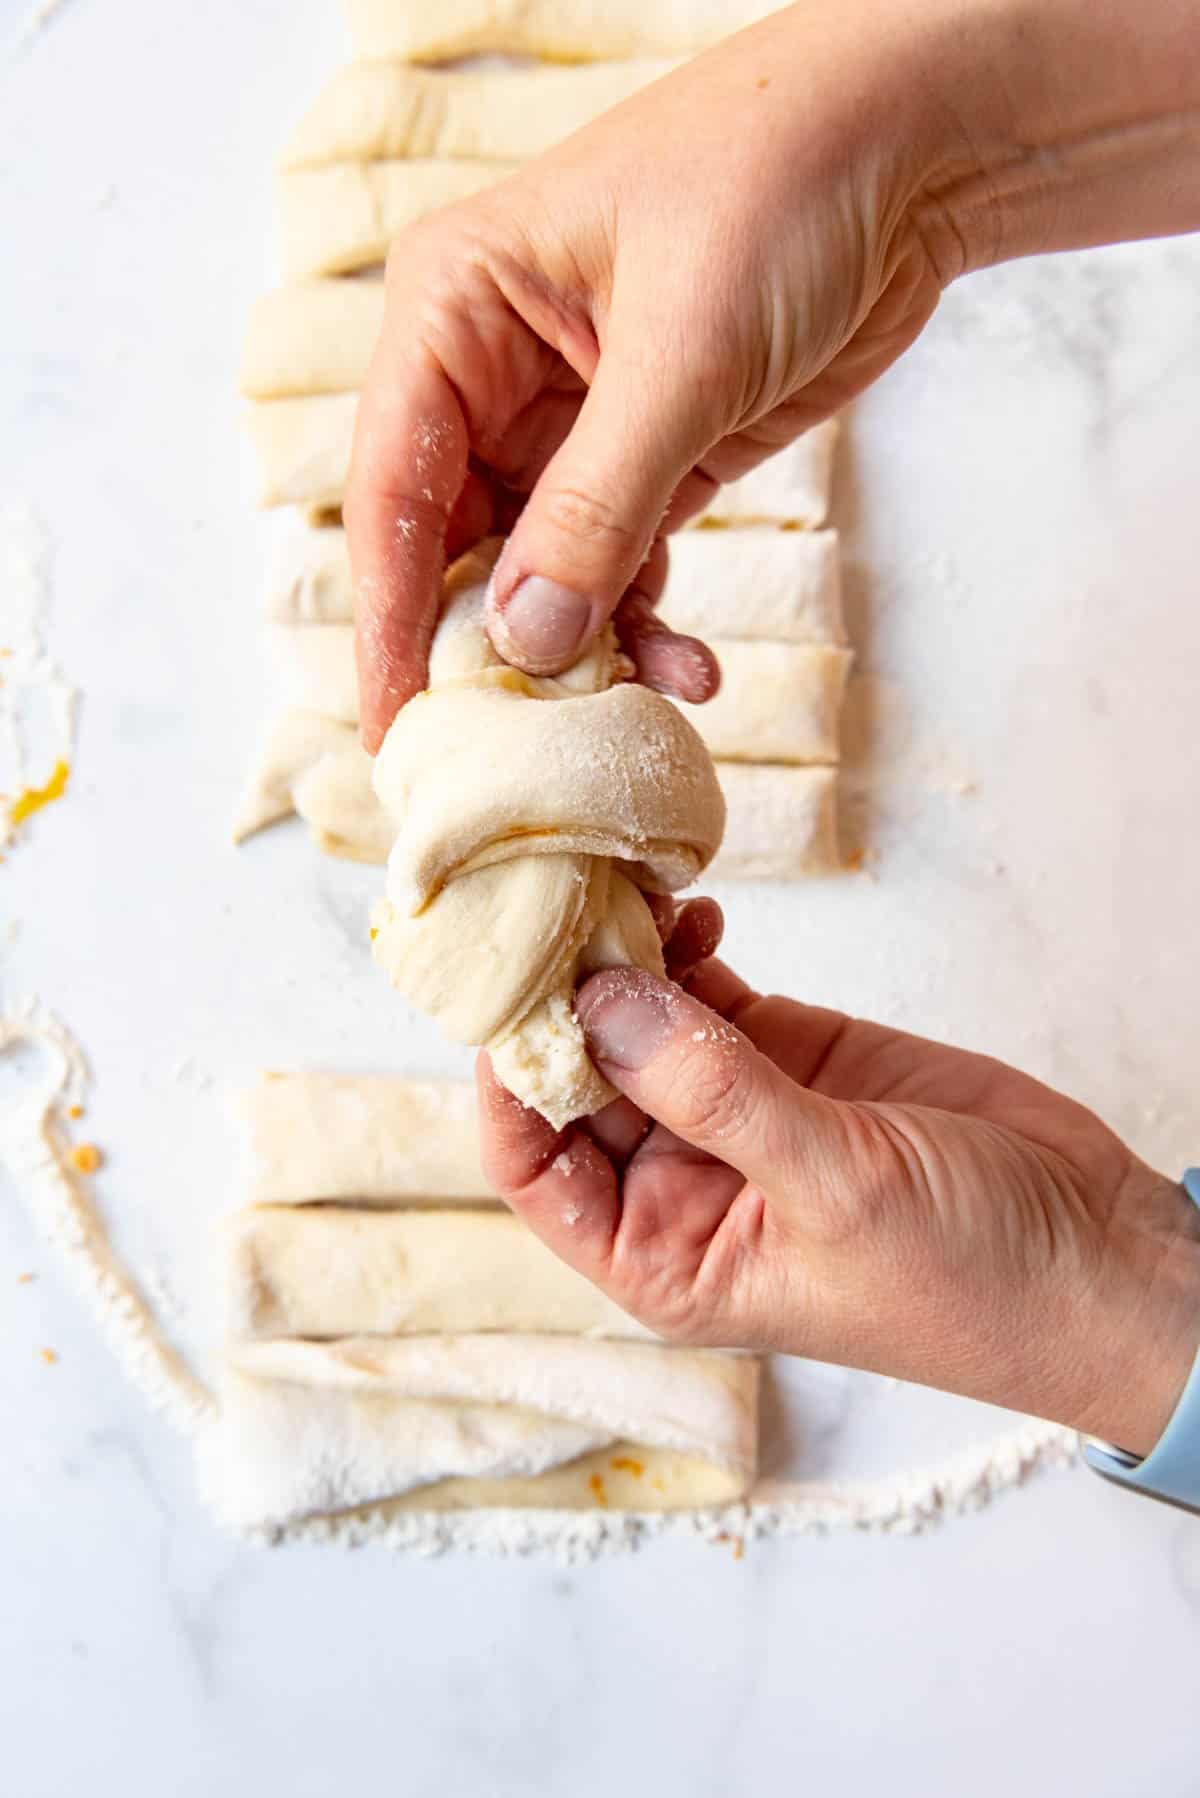 Gently tugging on the ends of a knotted sweet roll dough.